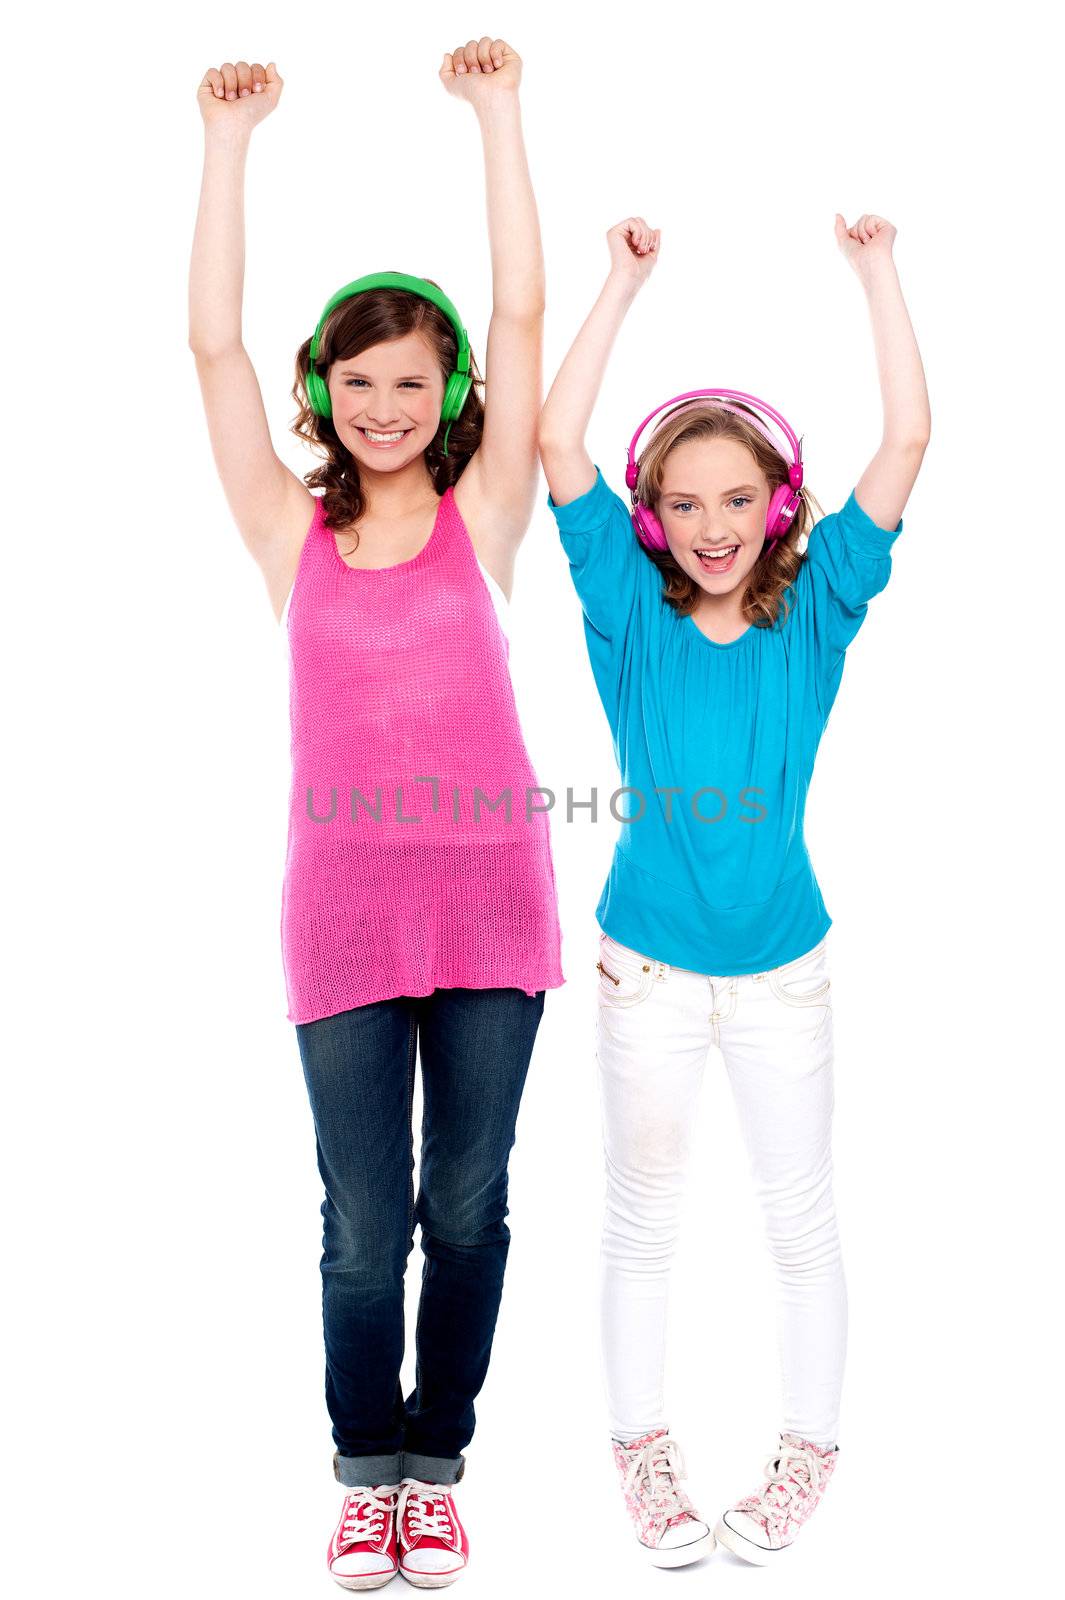 Excited young girls enjoying music together isolated over white. Full length portraits